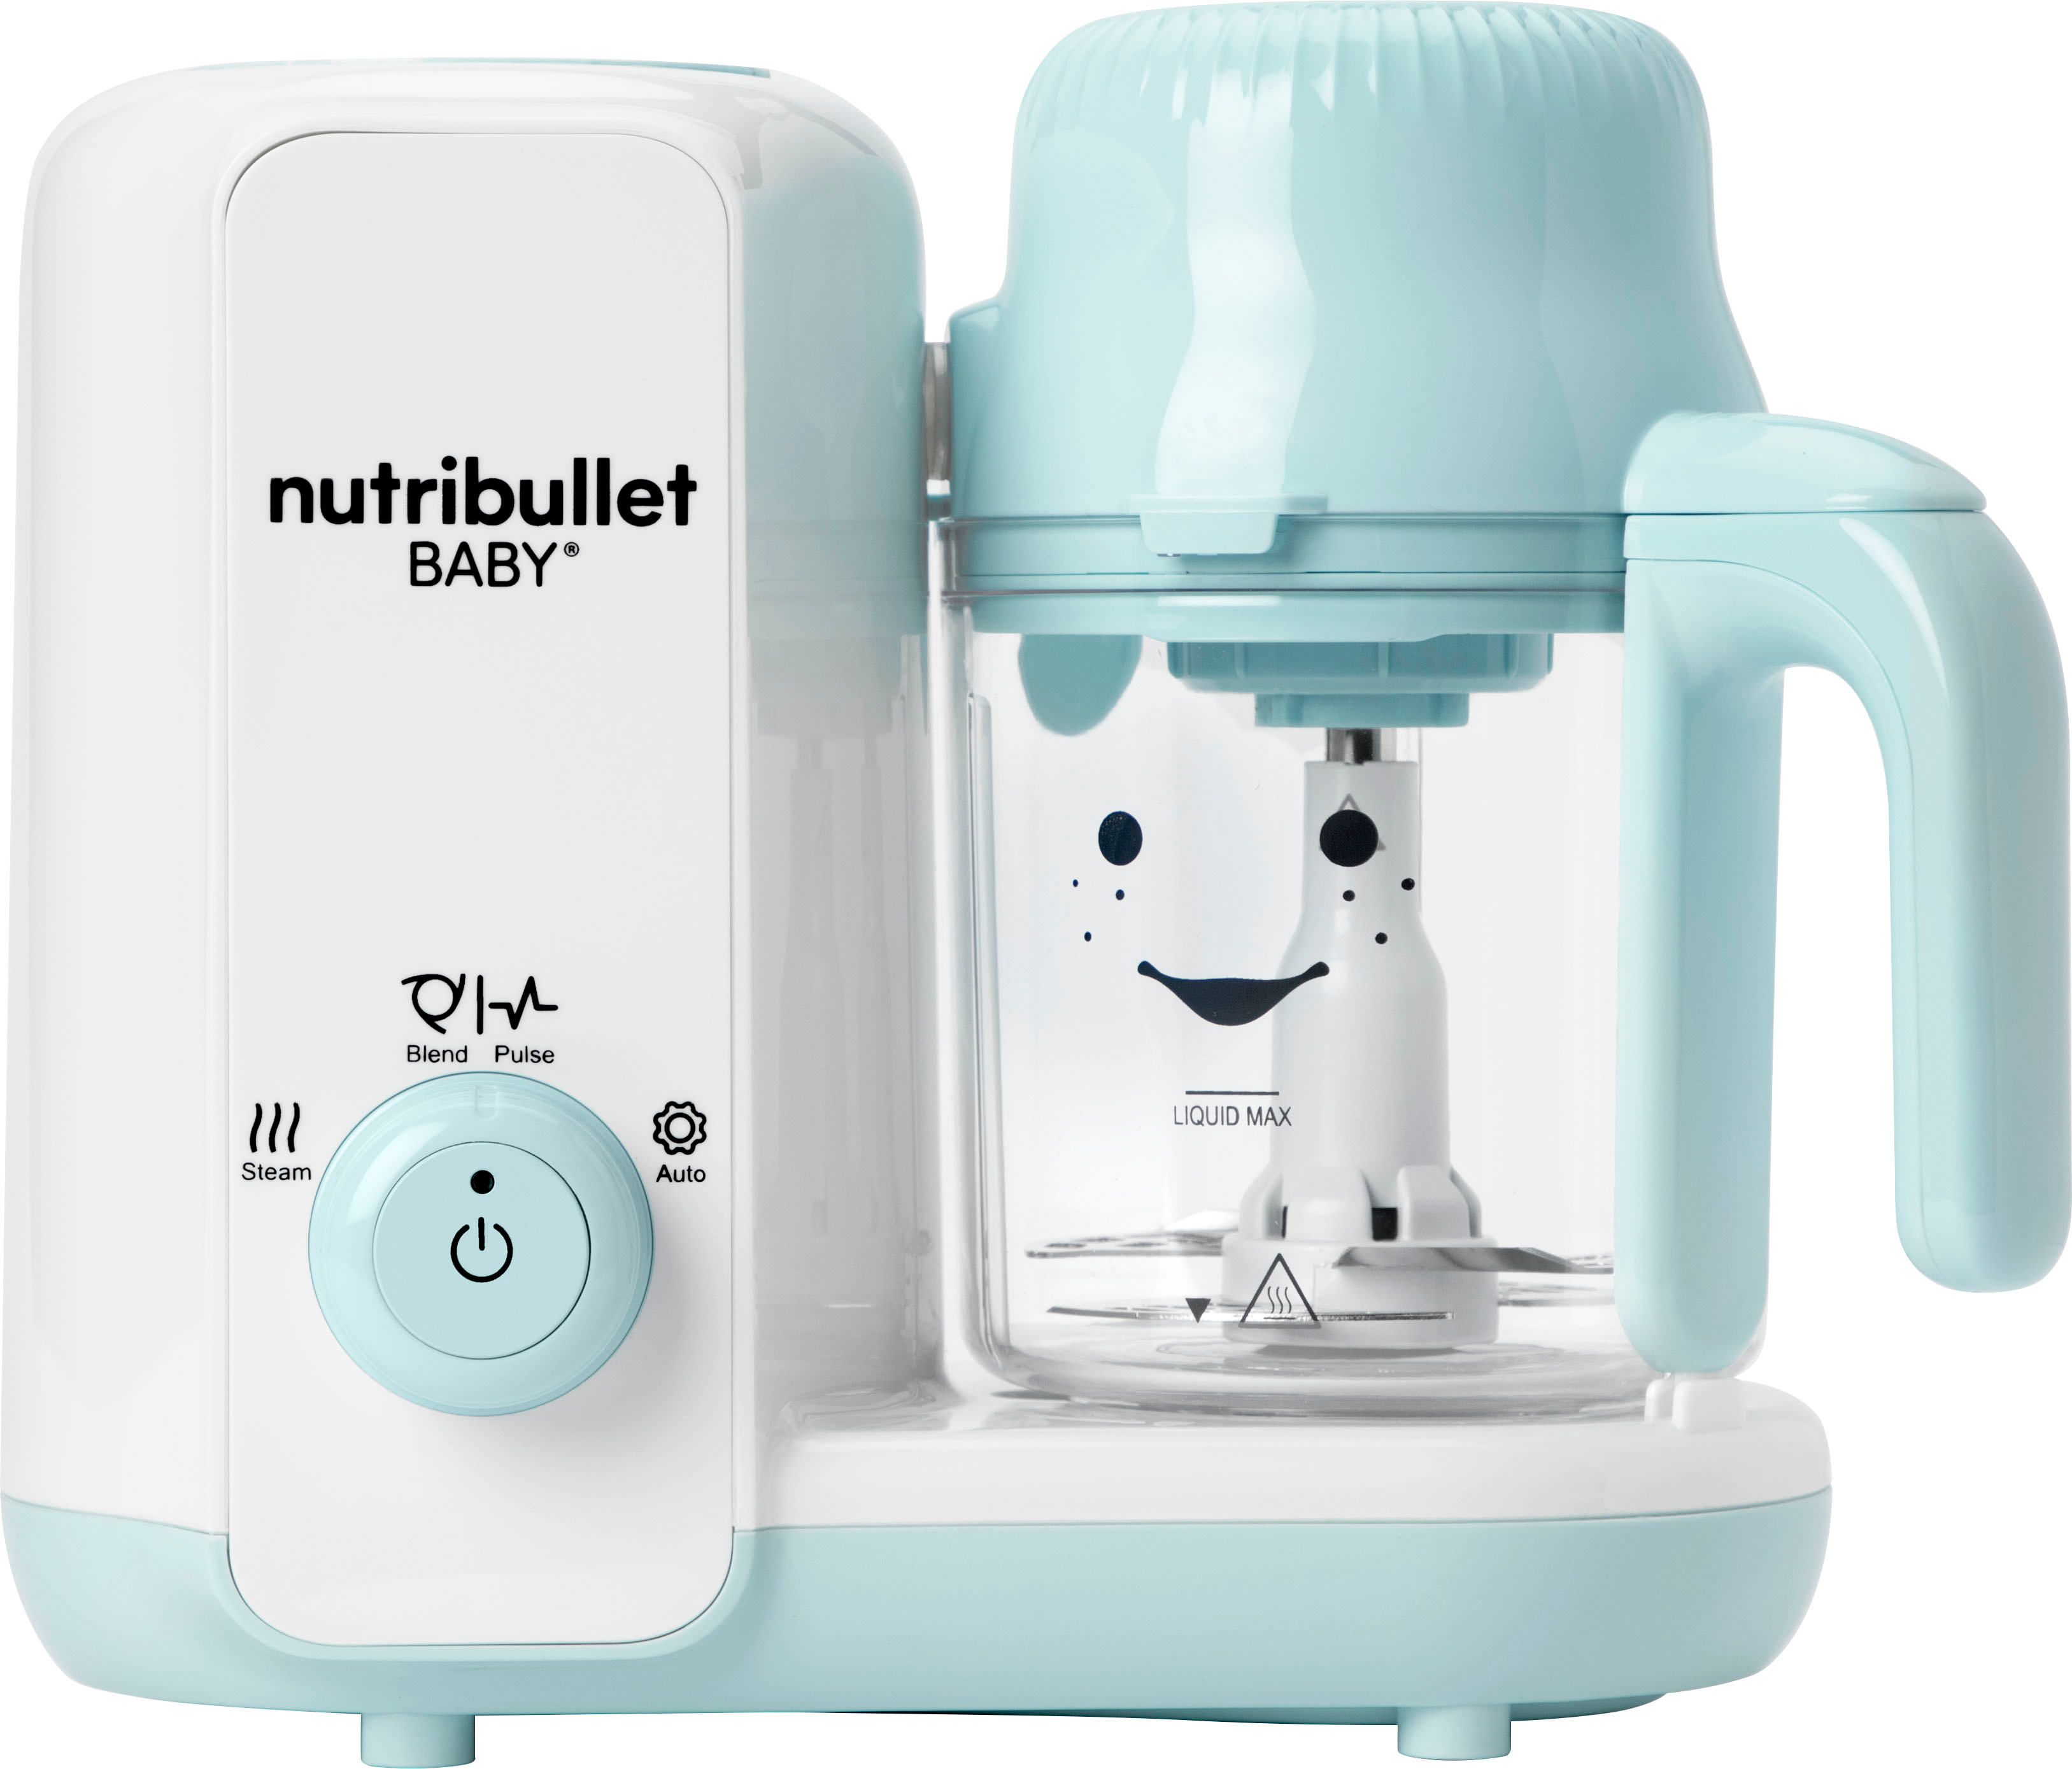 Nutribullet Baby (12 stores) find the best prices today »